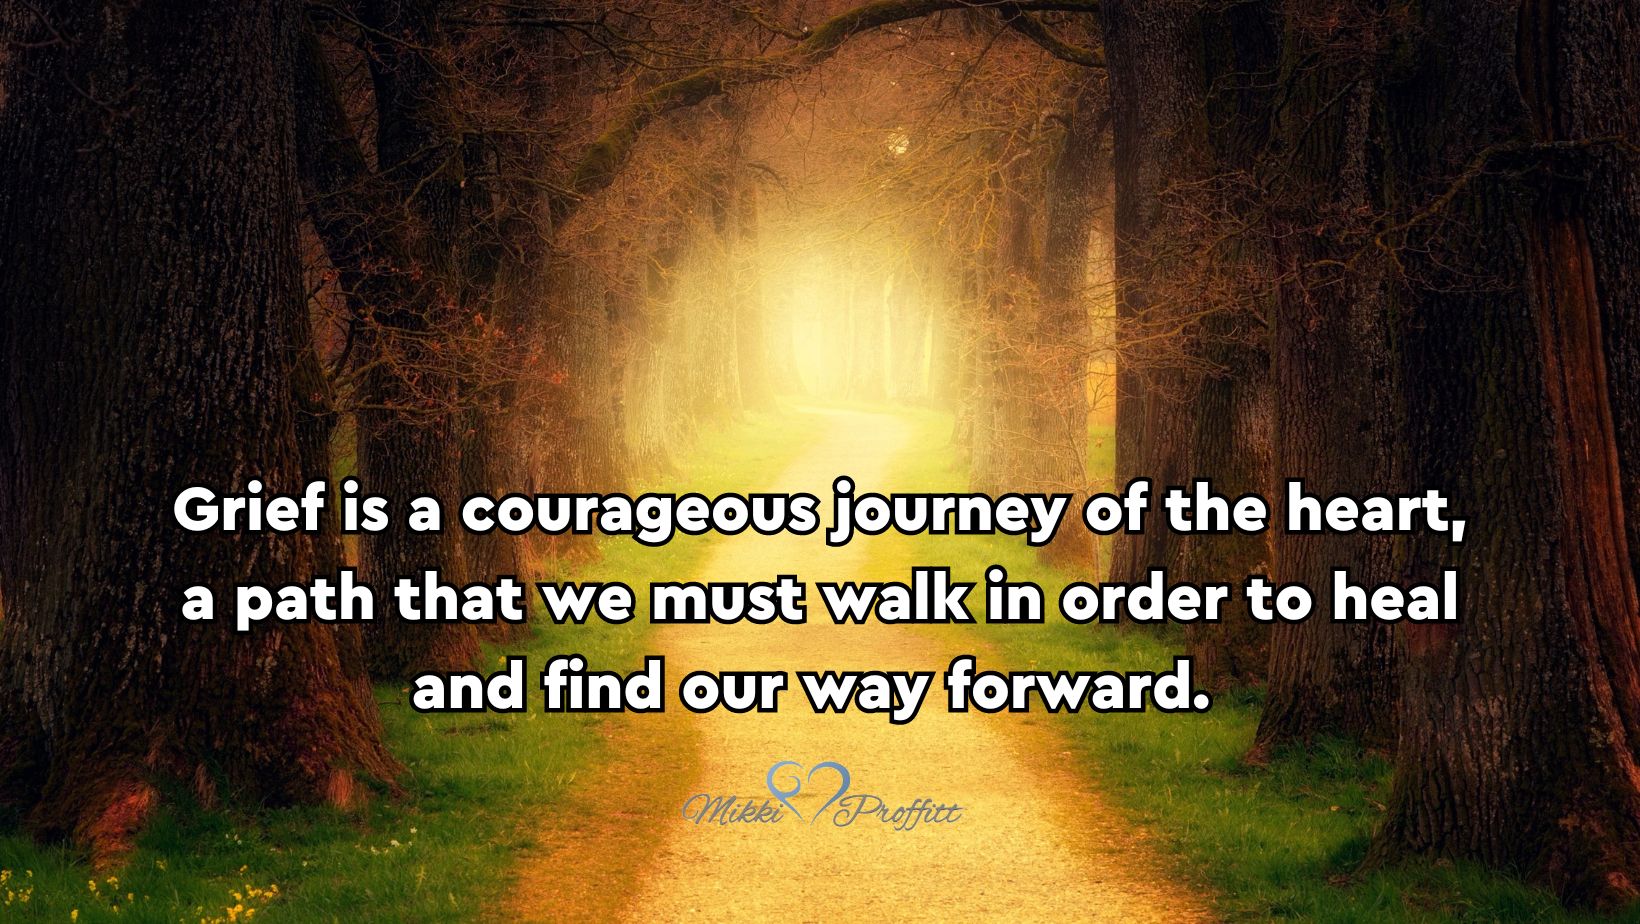 Grief is a courageous journey of the heart, a path that we must walk in order to heal and find our way forward.